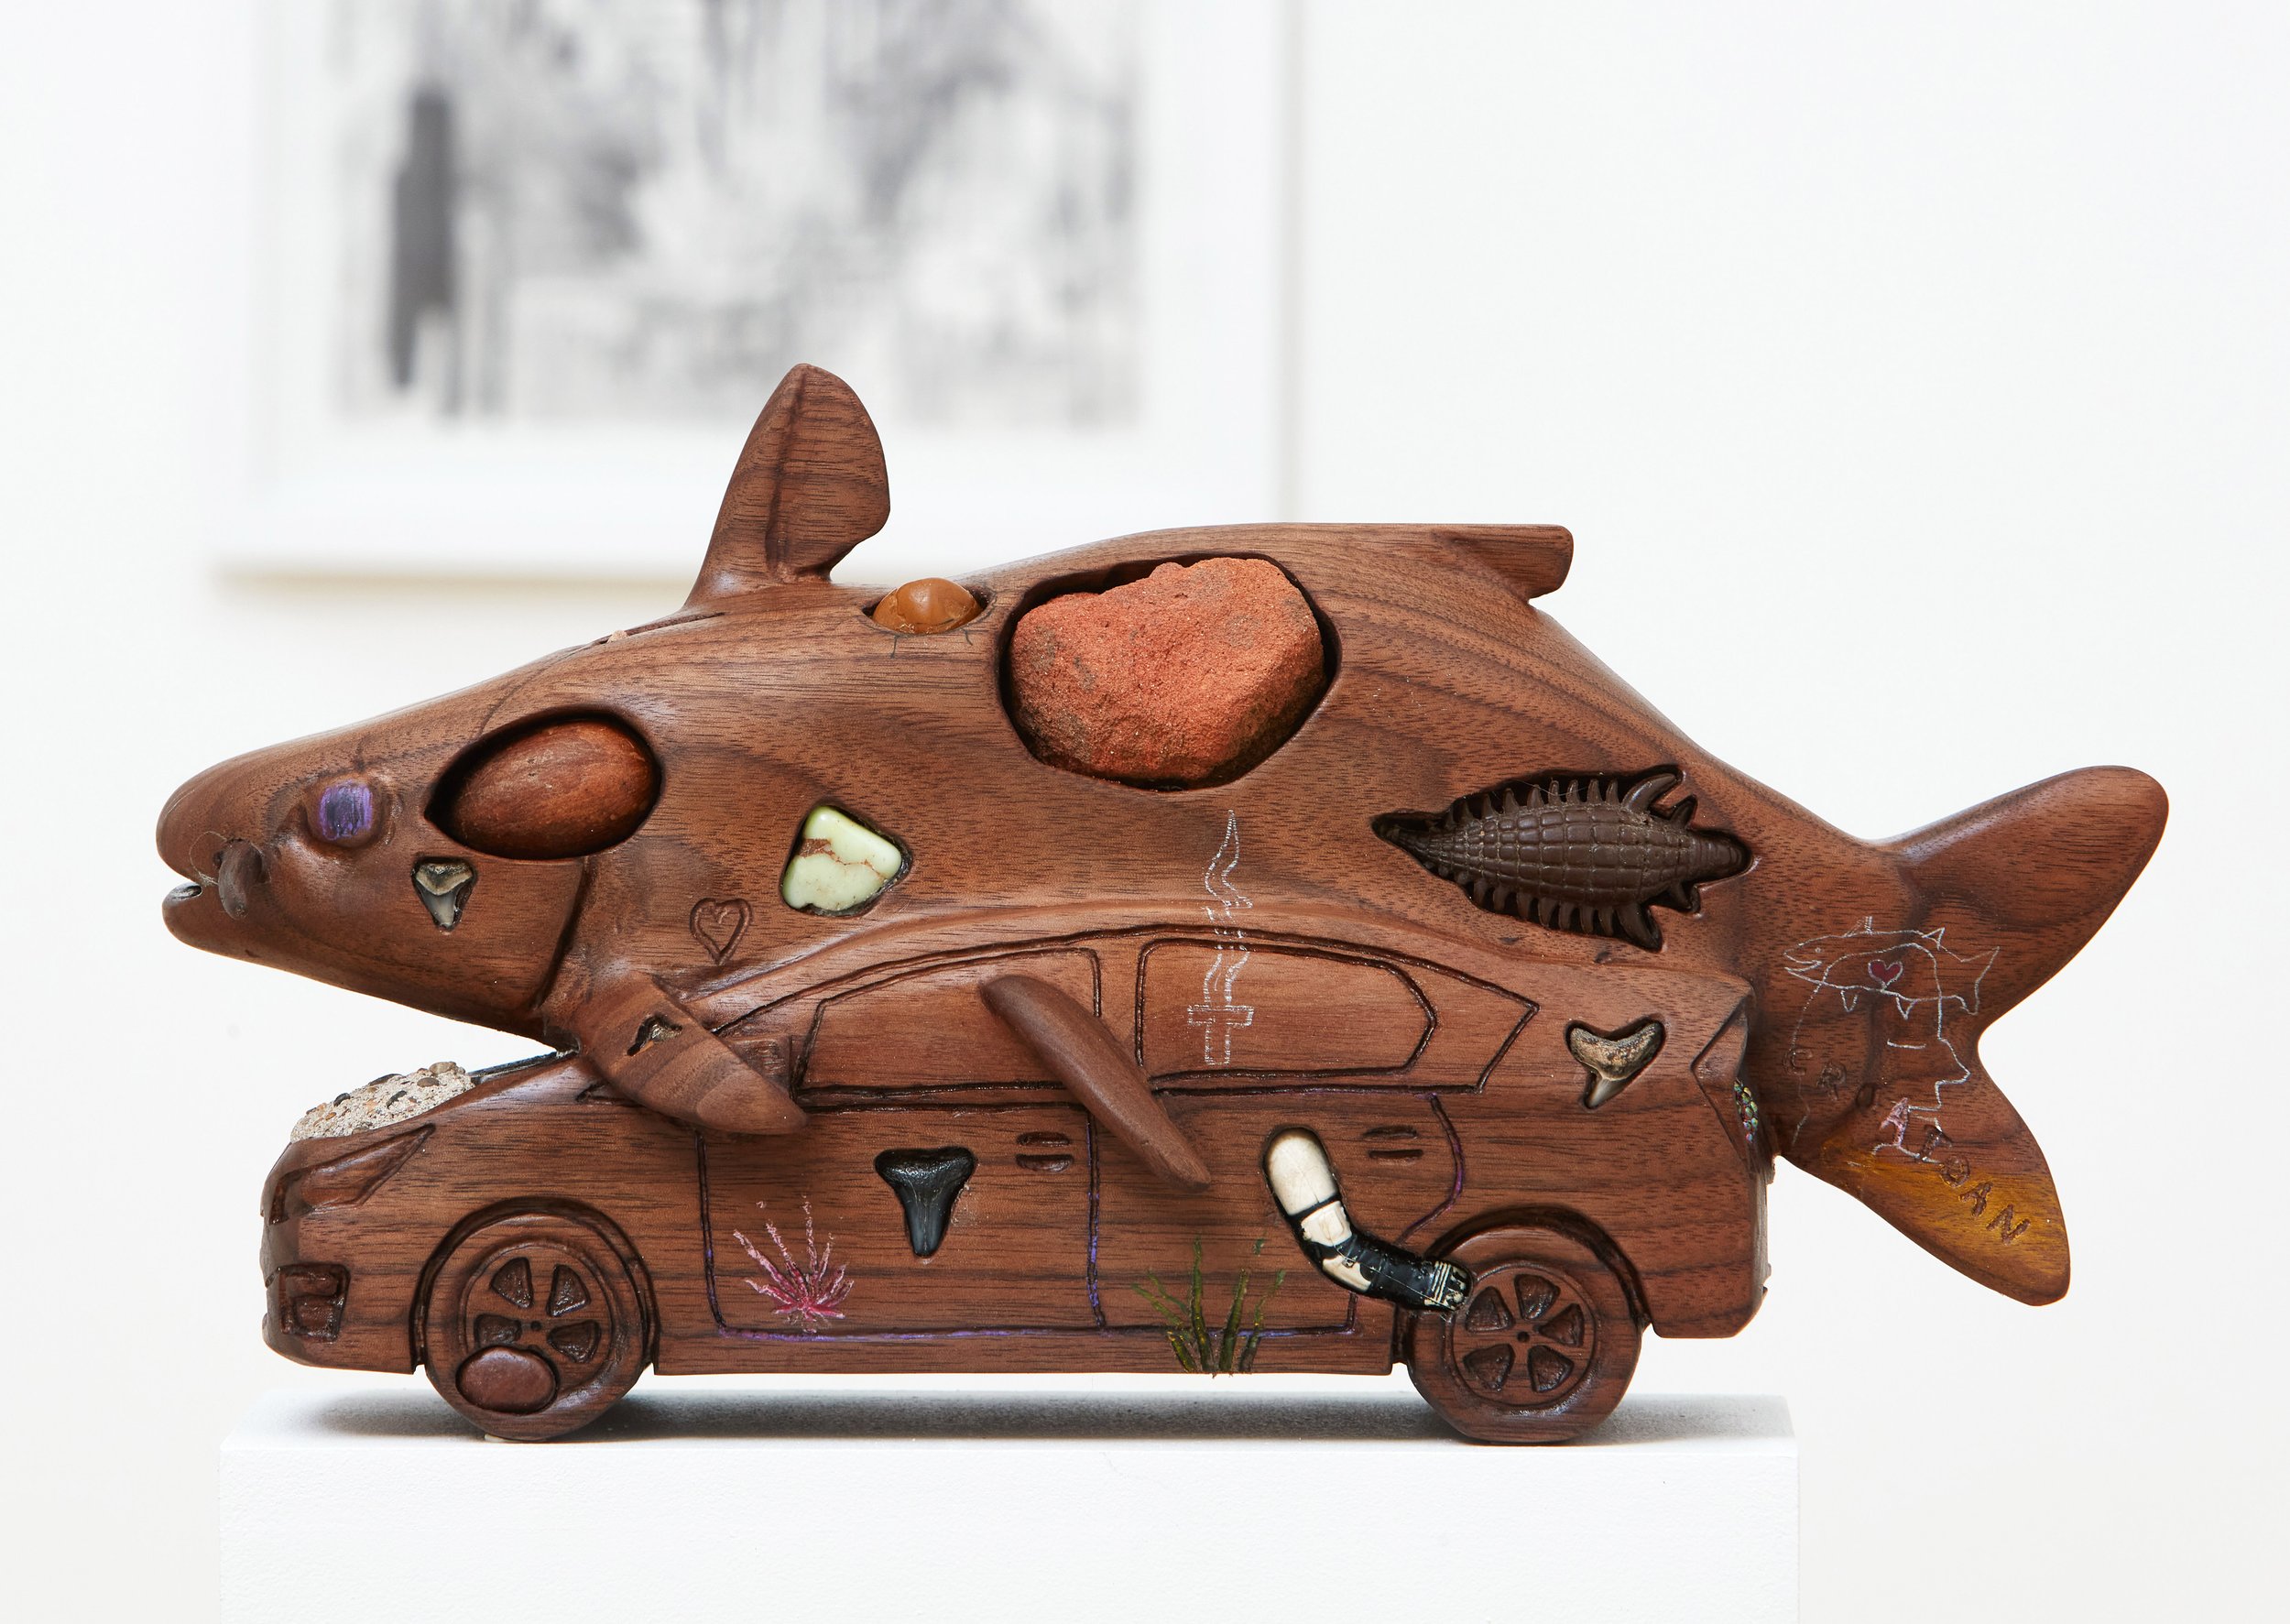   Catfish/Prius , 2022, meteorite, fossils, rocks, amber, brick, concrete, porcelain, aluminum, iron, plastic toys, and colored pencil on carved walnut, 13” x 8” x 6” 